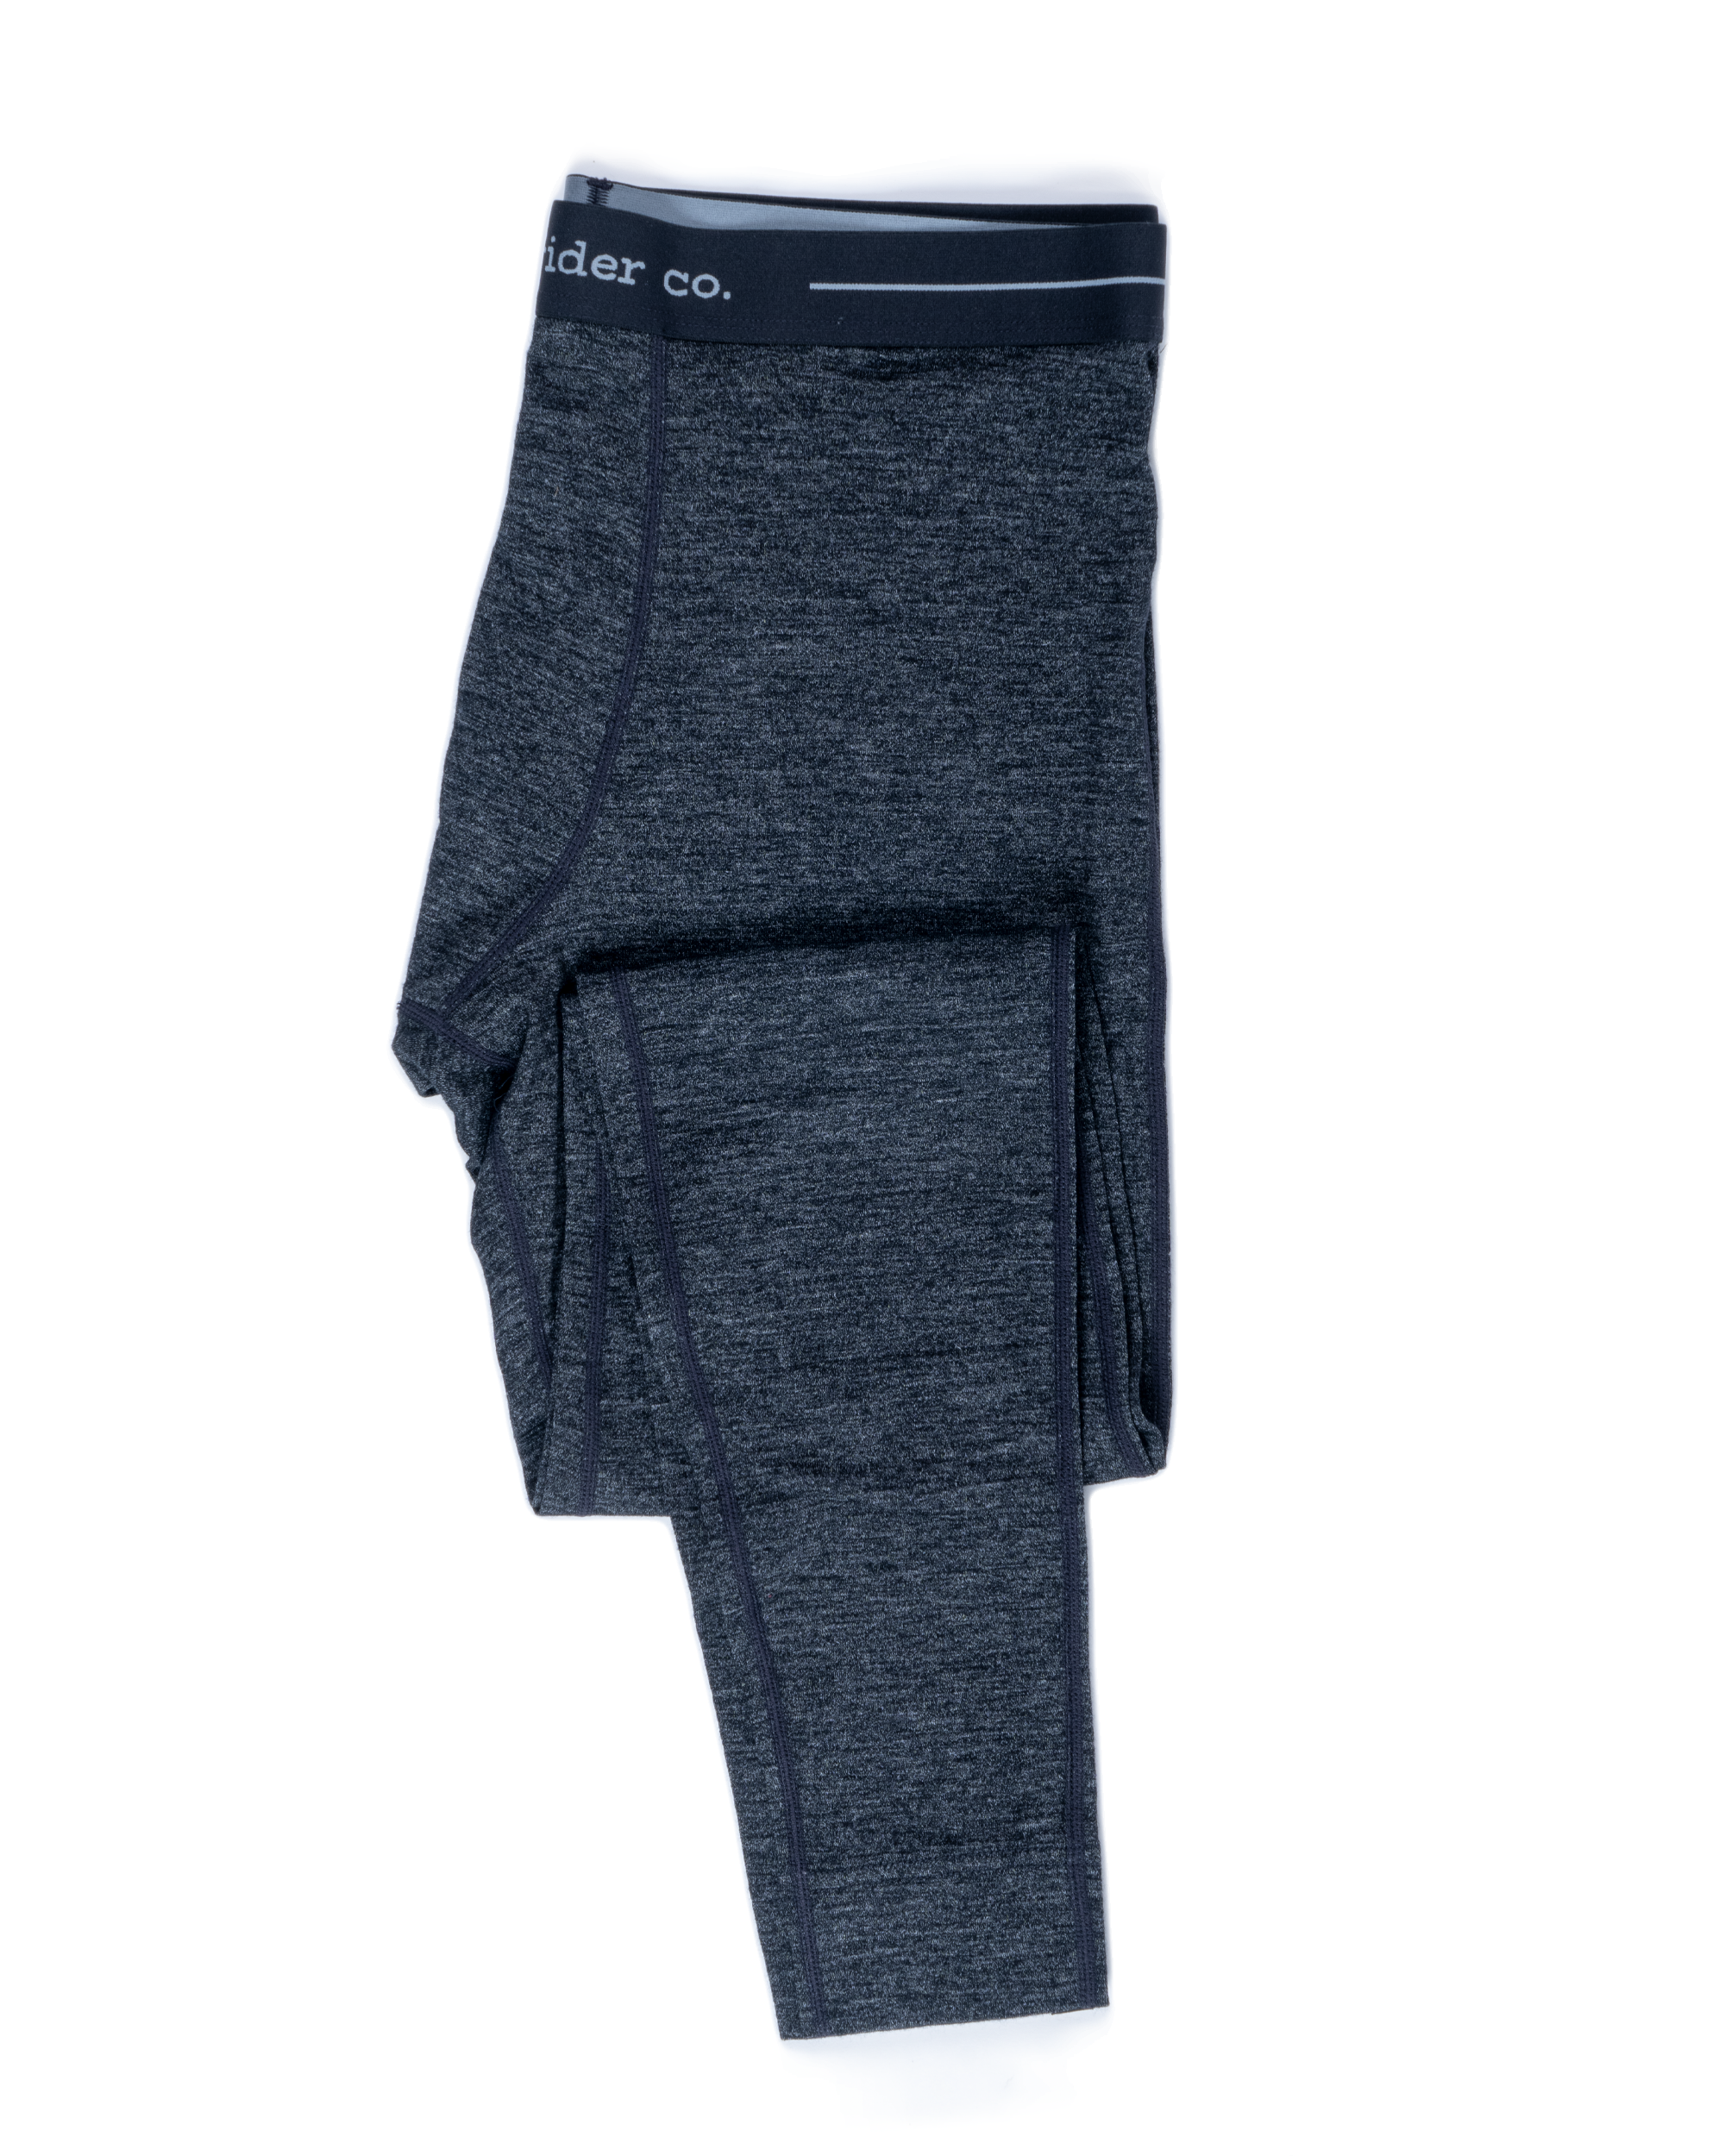 FR. Merino Base Layer Pant Black - Foreign Rider Co.